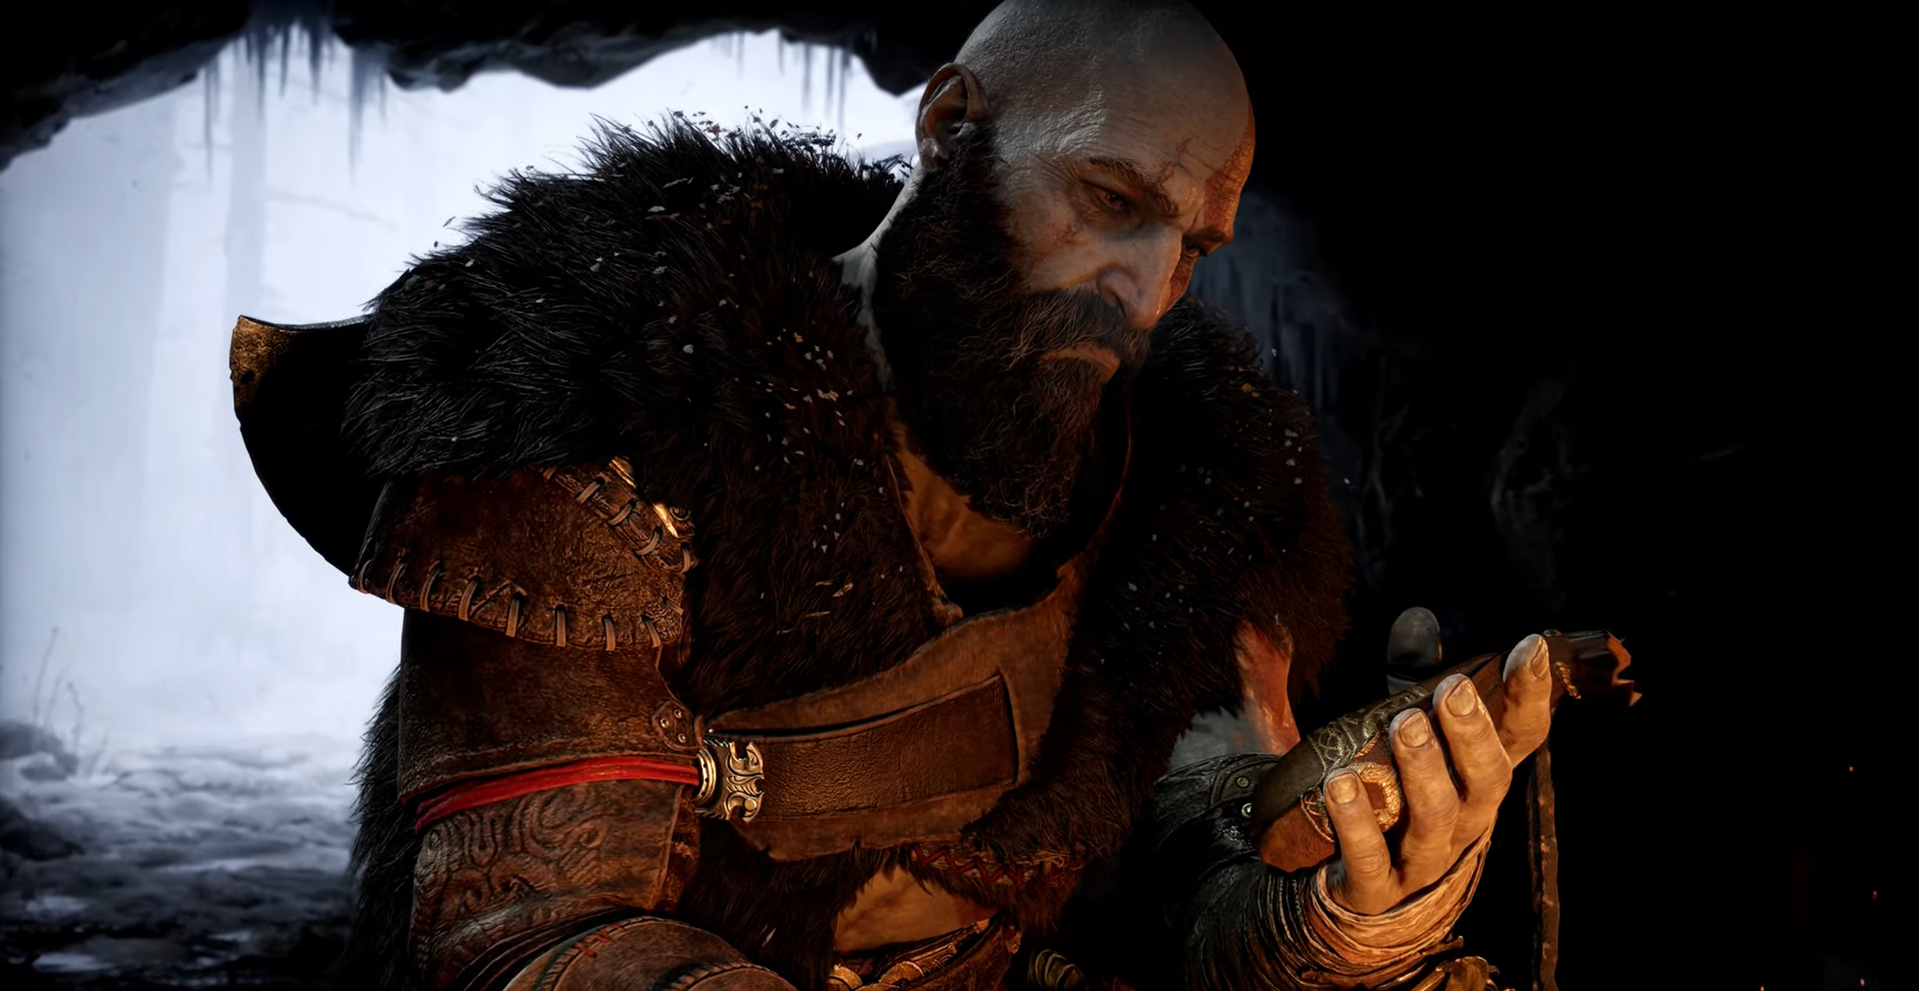 Screenshot of Kratos contemplating a pouch in his hand.